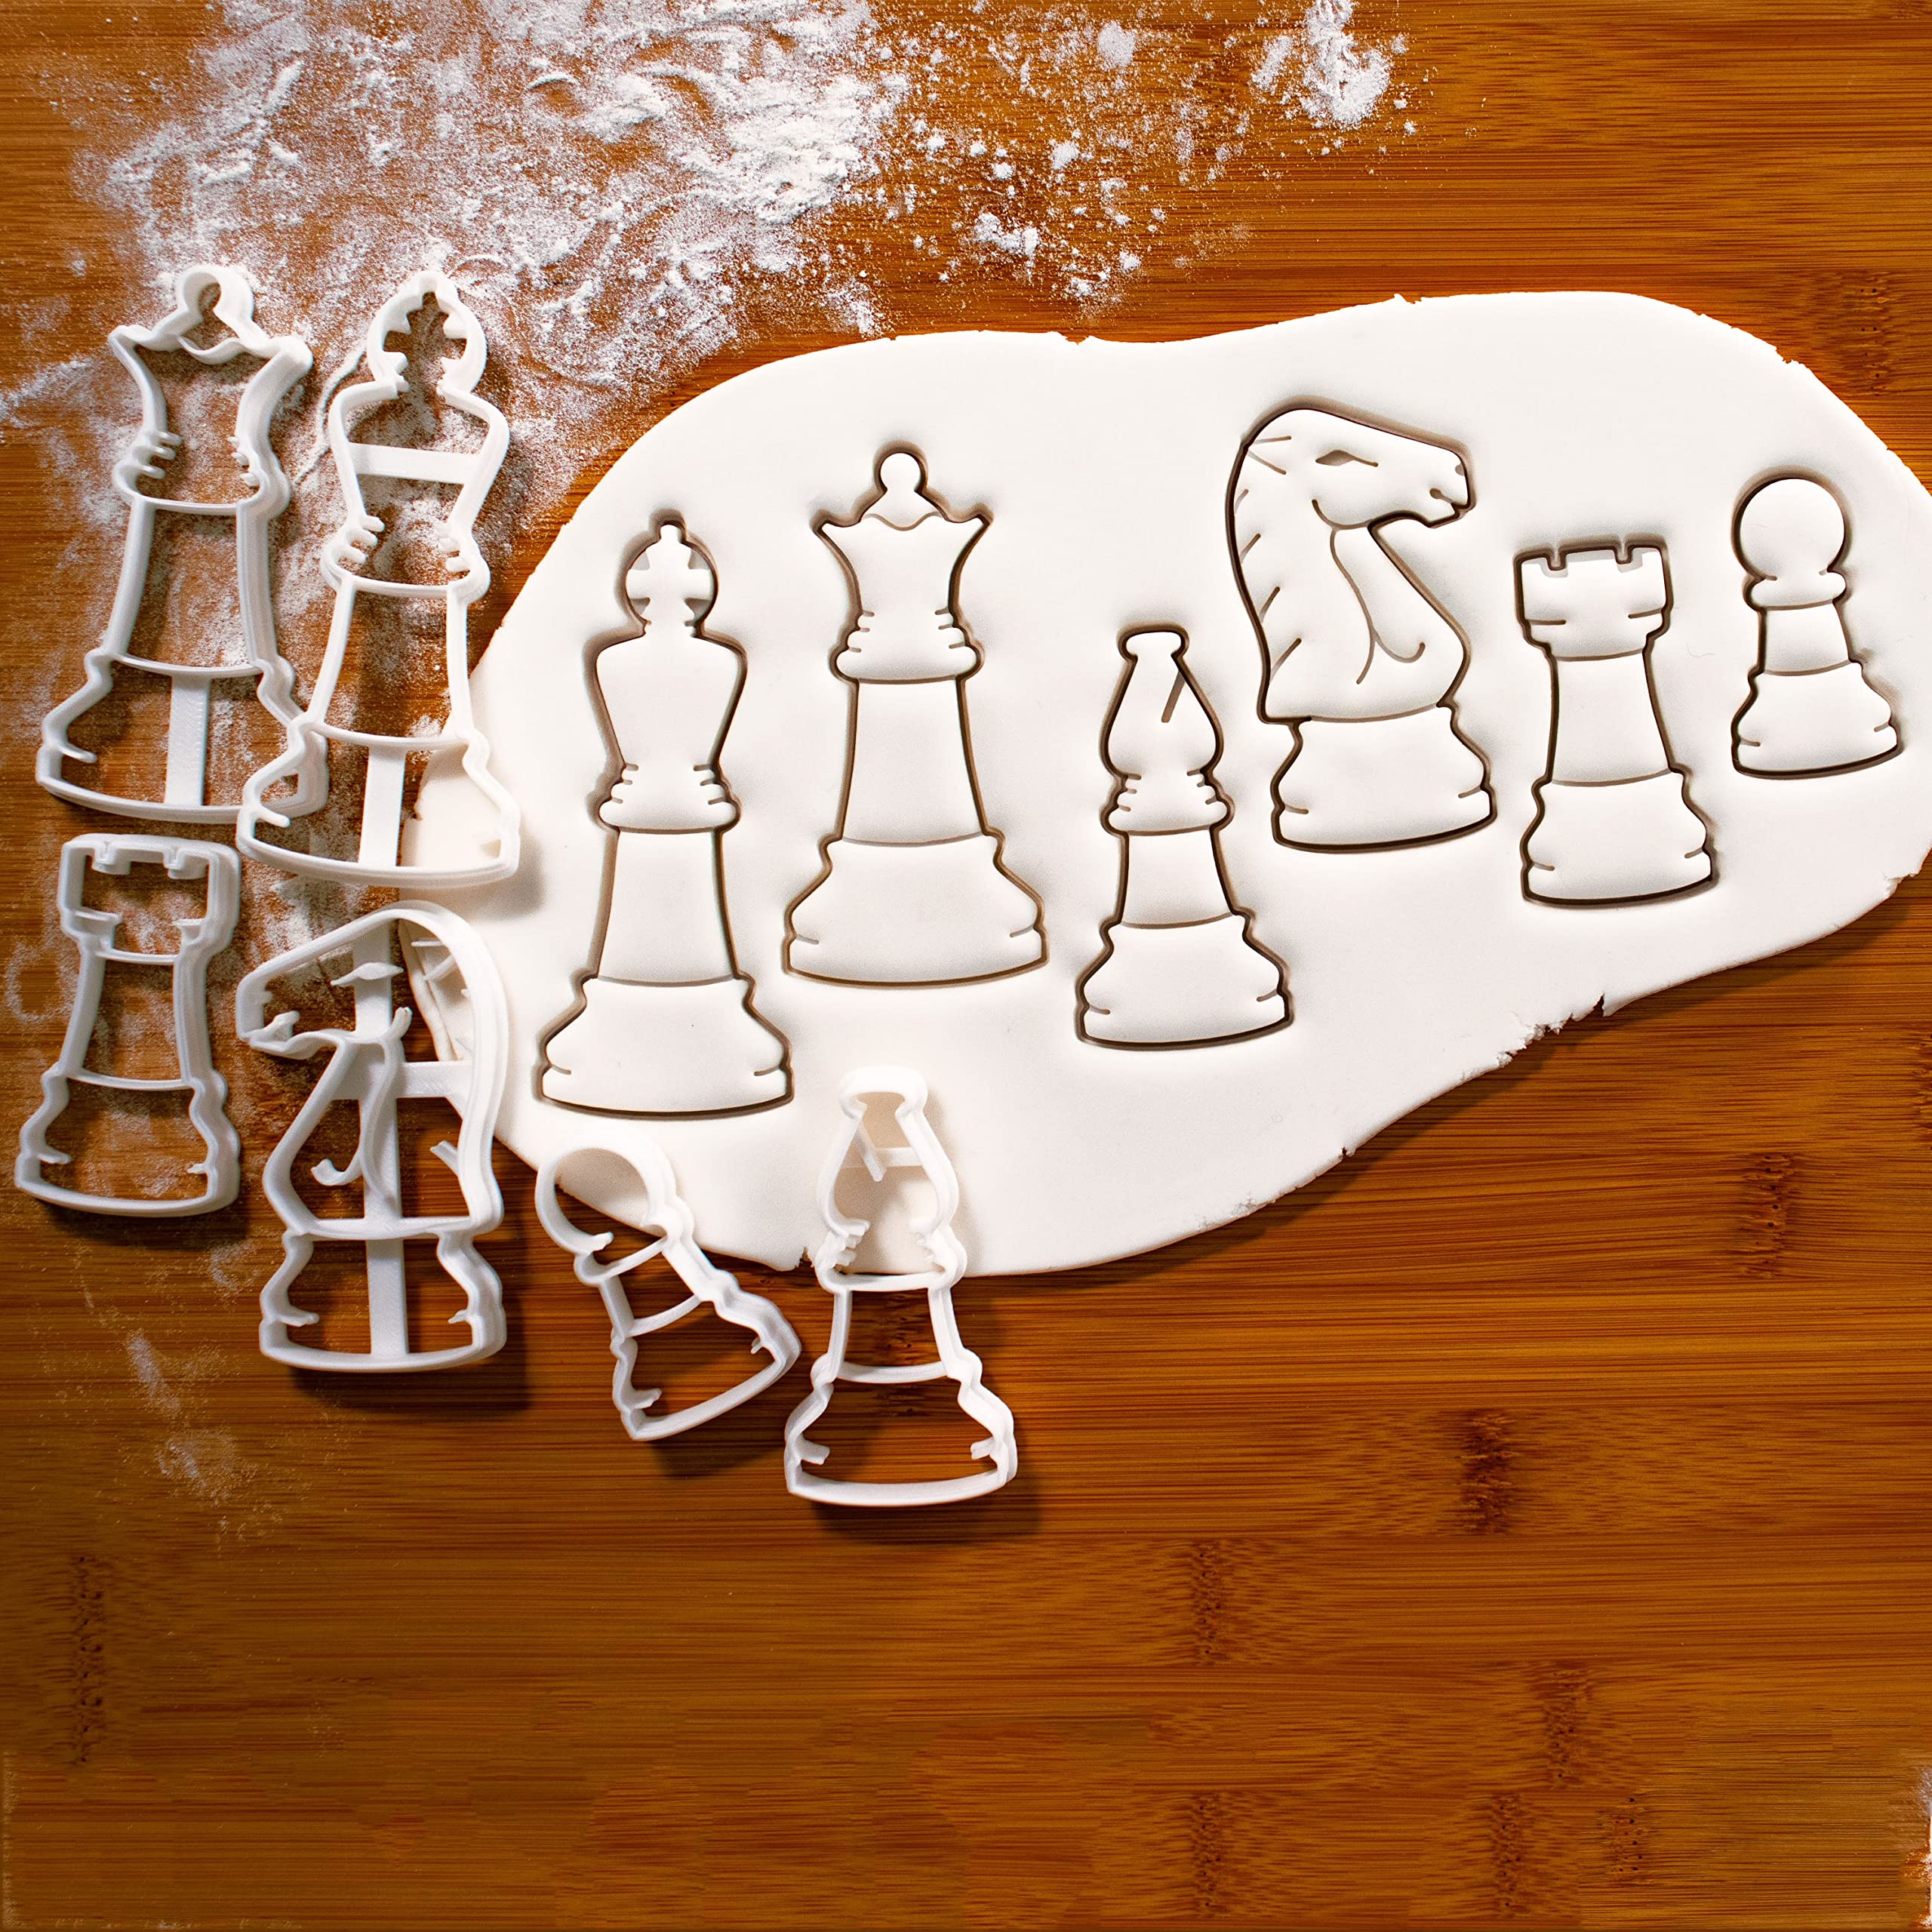 Set of 6 Chess Pieces Cookie Cutters (King, Queen, Rook, Bishop, Knight, and Pawn) - Bakerlogy